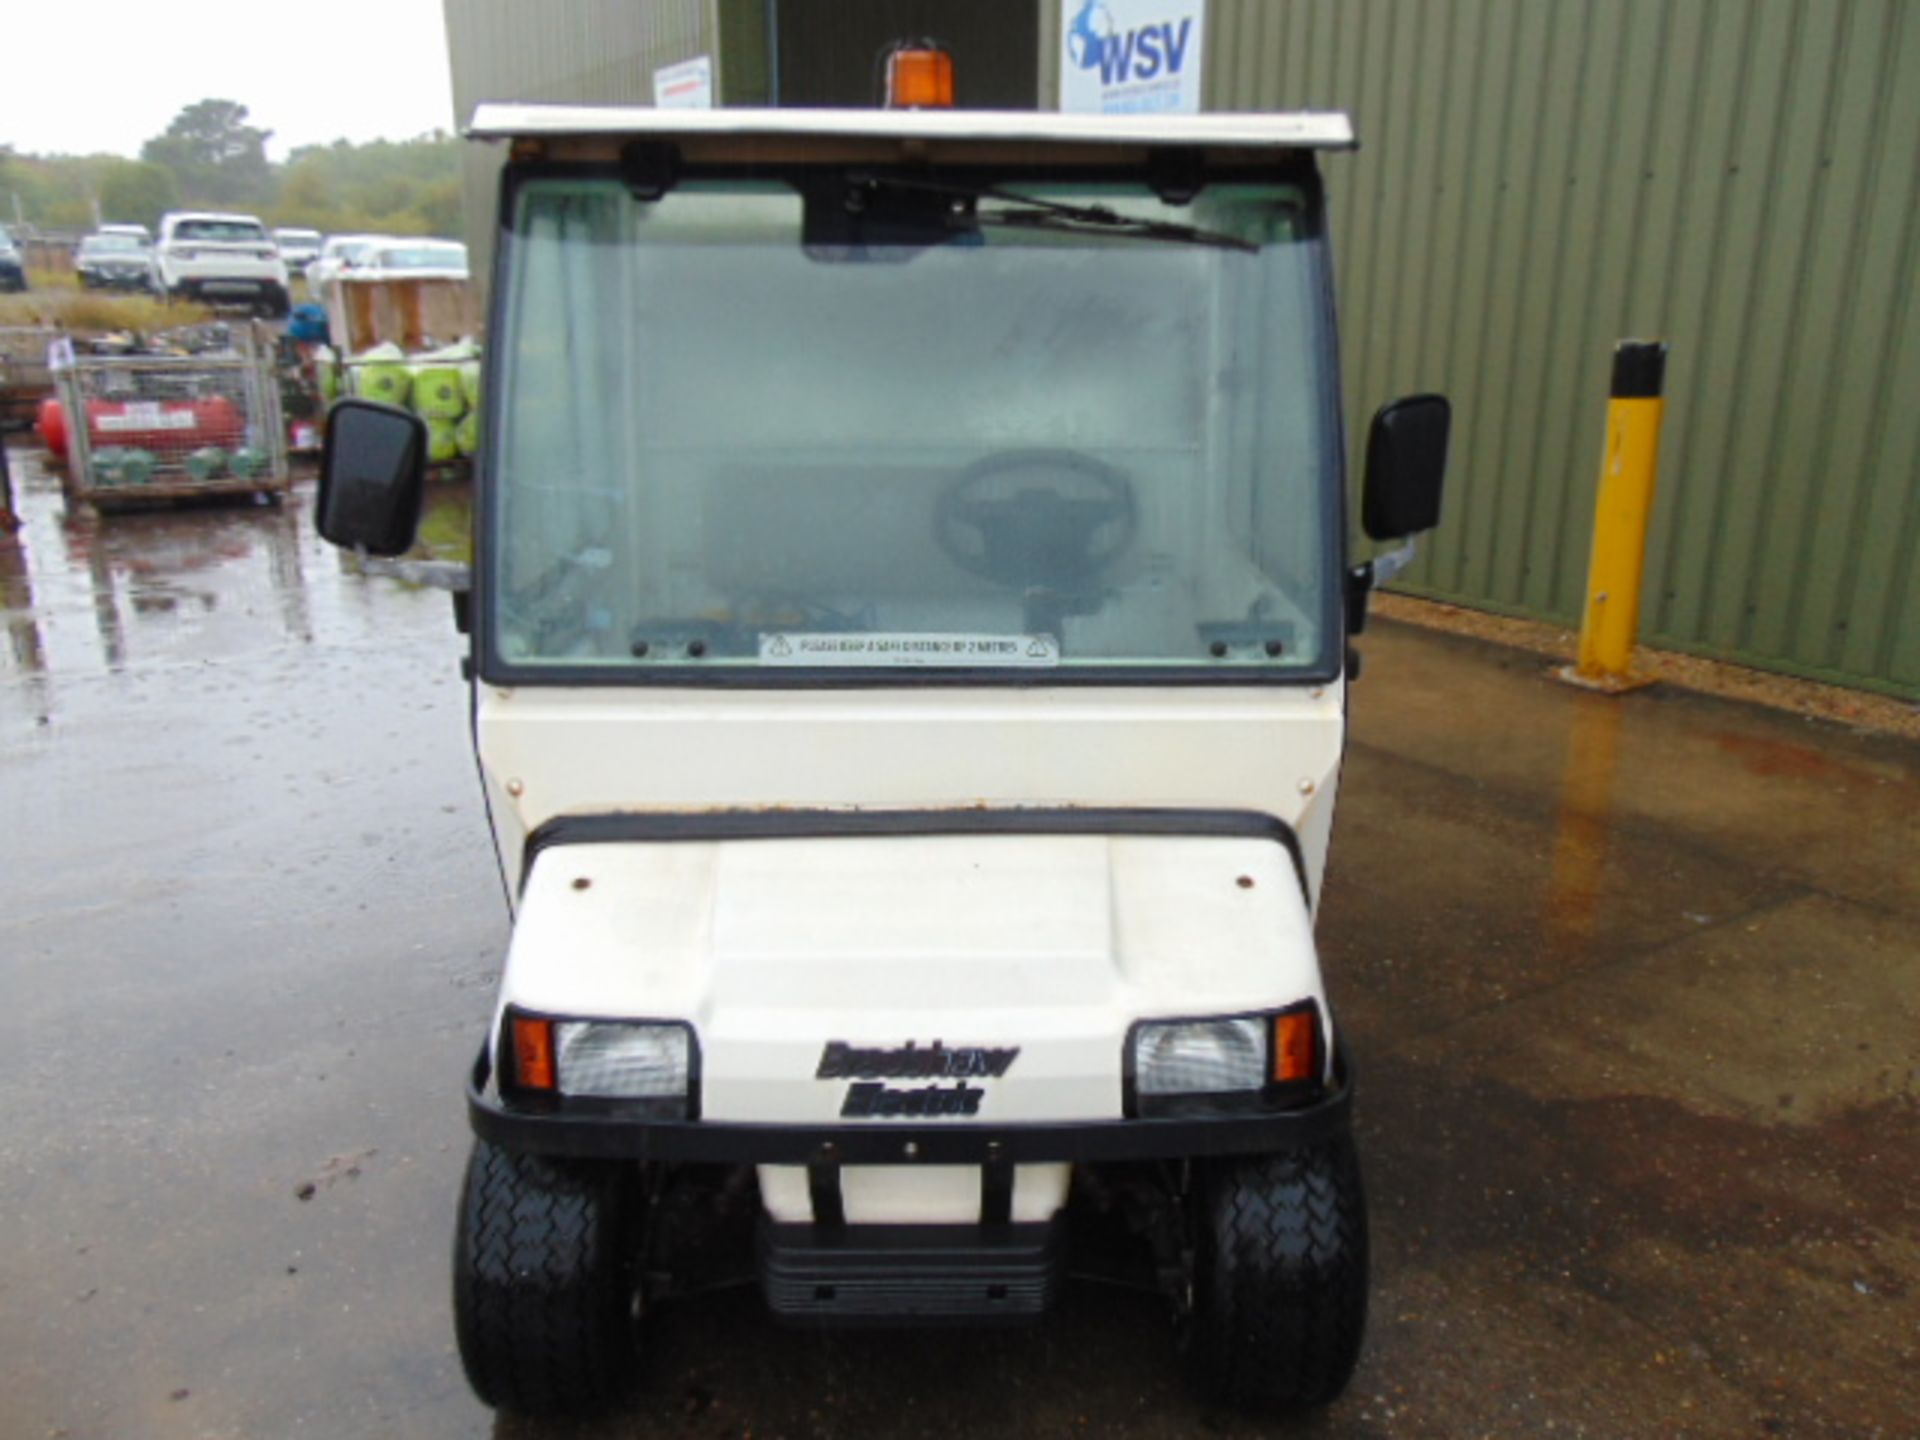 Club Car Turf 2 Carryall Electric Utility Truck ONLY 1,485 HOURS! - Image 2 of 18